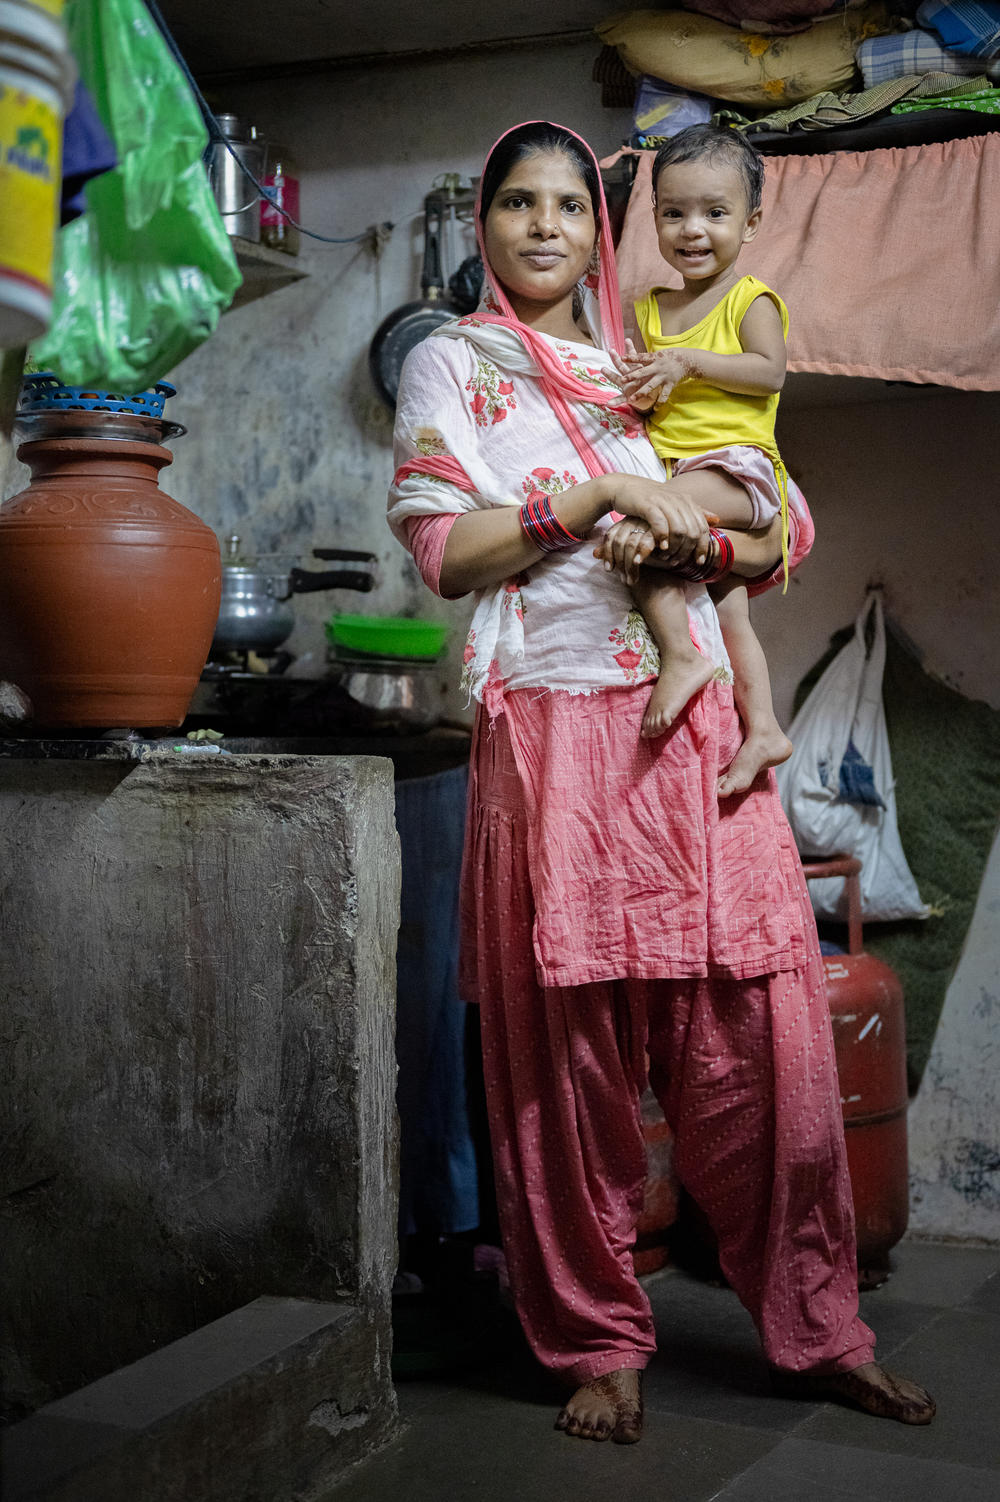 Shabana Khatoon, 23, holds her 9-month-old daughter, Adeeba, at their home in Dharavi. Khatoon's daughter was diagnosed as malnourished when the family arrived in Mumbai from the relatively poor Indian state of Jharkhand. Now Khatoon is pregnant again — and gets visits from a social worker with advice on prenatal care.